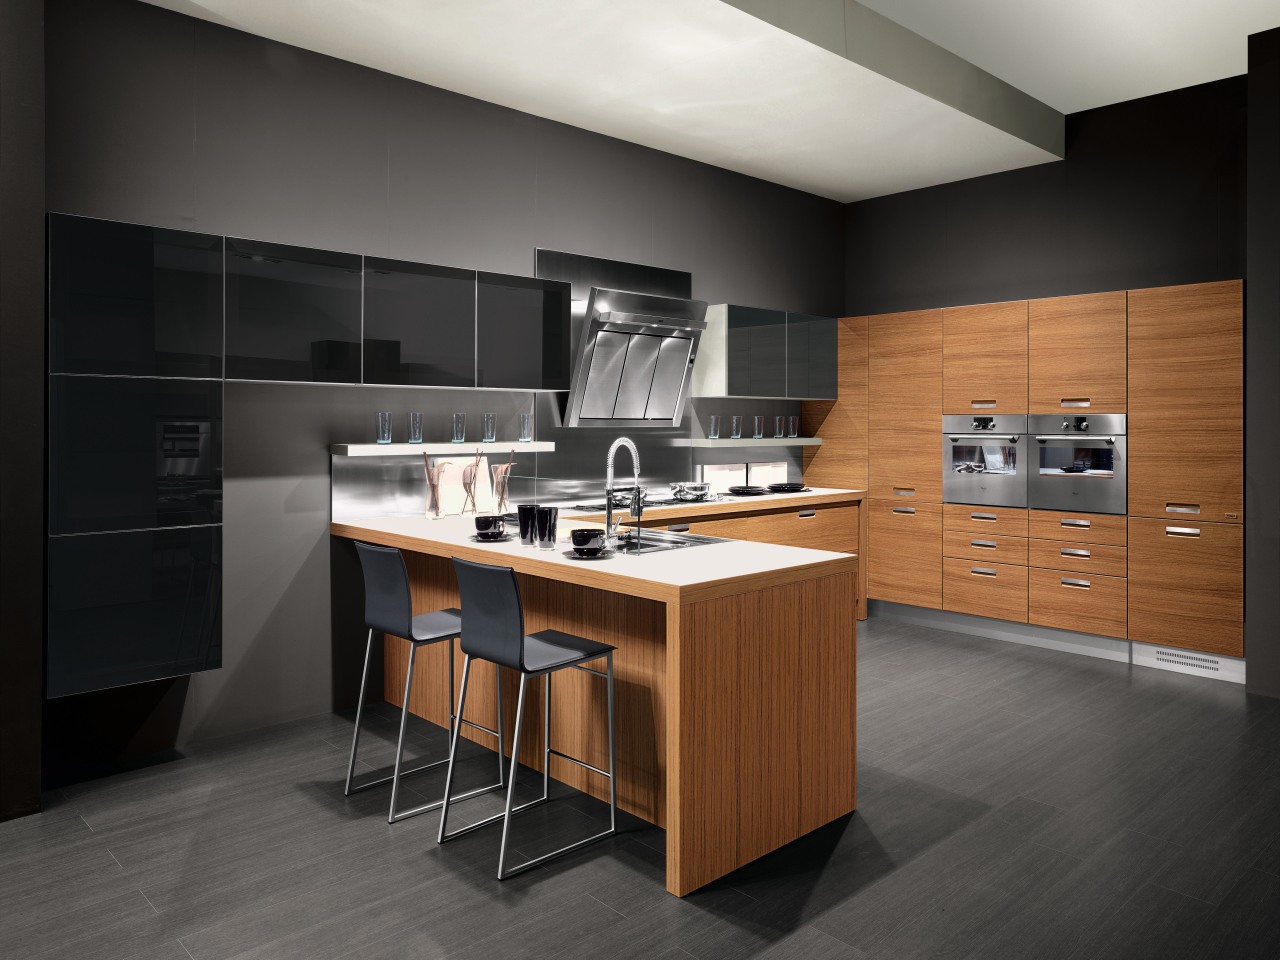 View of kitchen with wood grain cabinetry, grey cabinetry, countertop, cuisine classique, floor, furniture, interior design, kitchen, product design, room, black